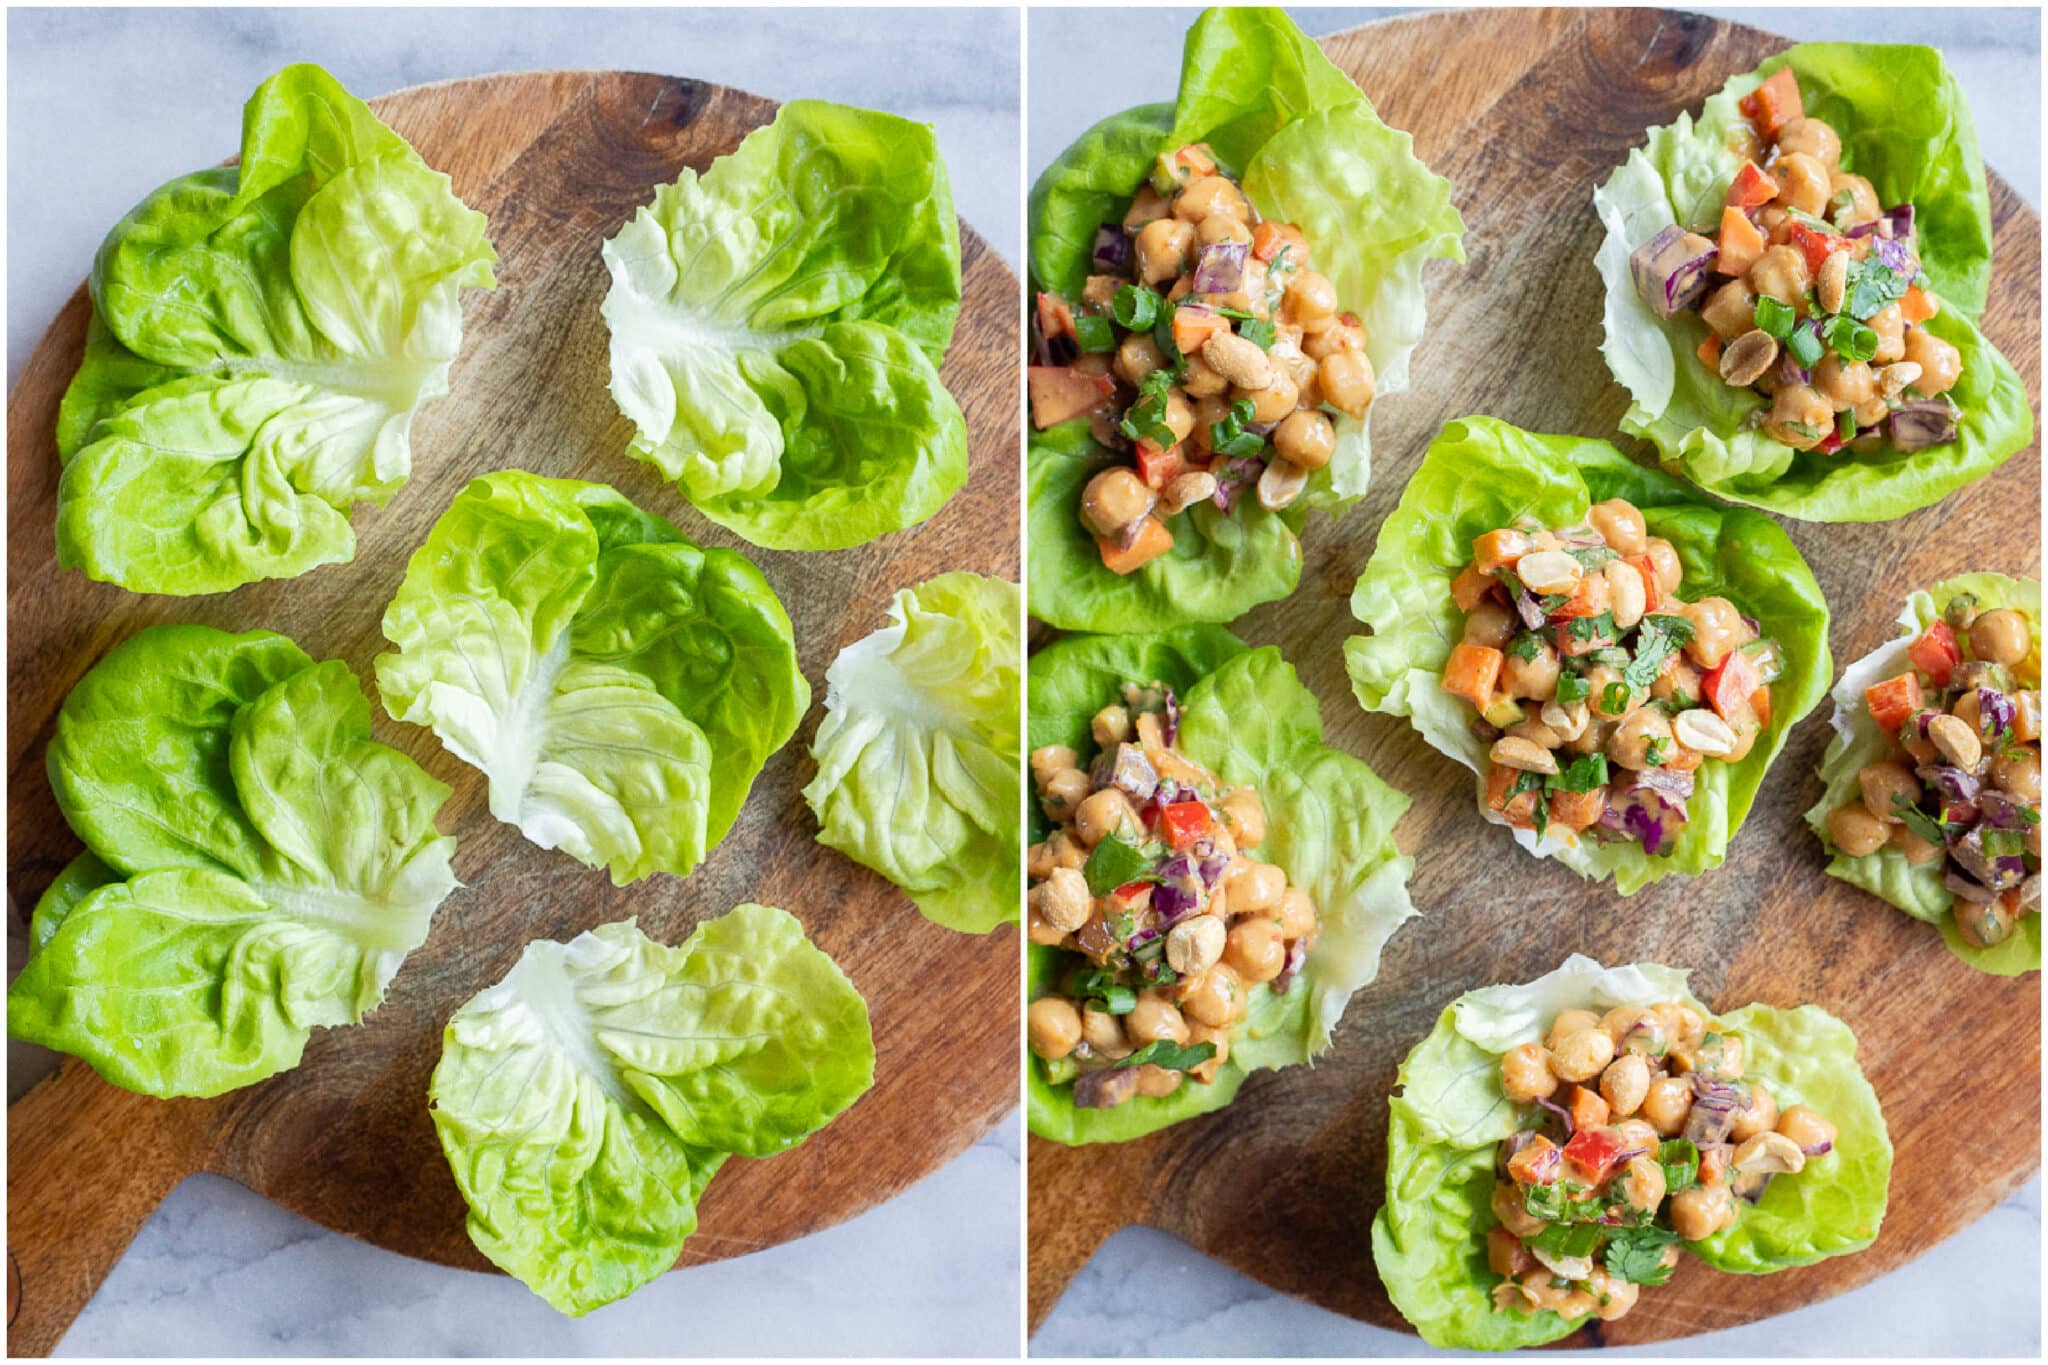 showing how to assemble and fill the lettuce wraps